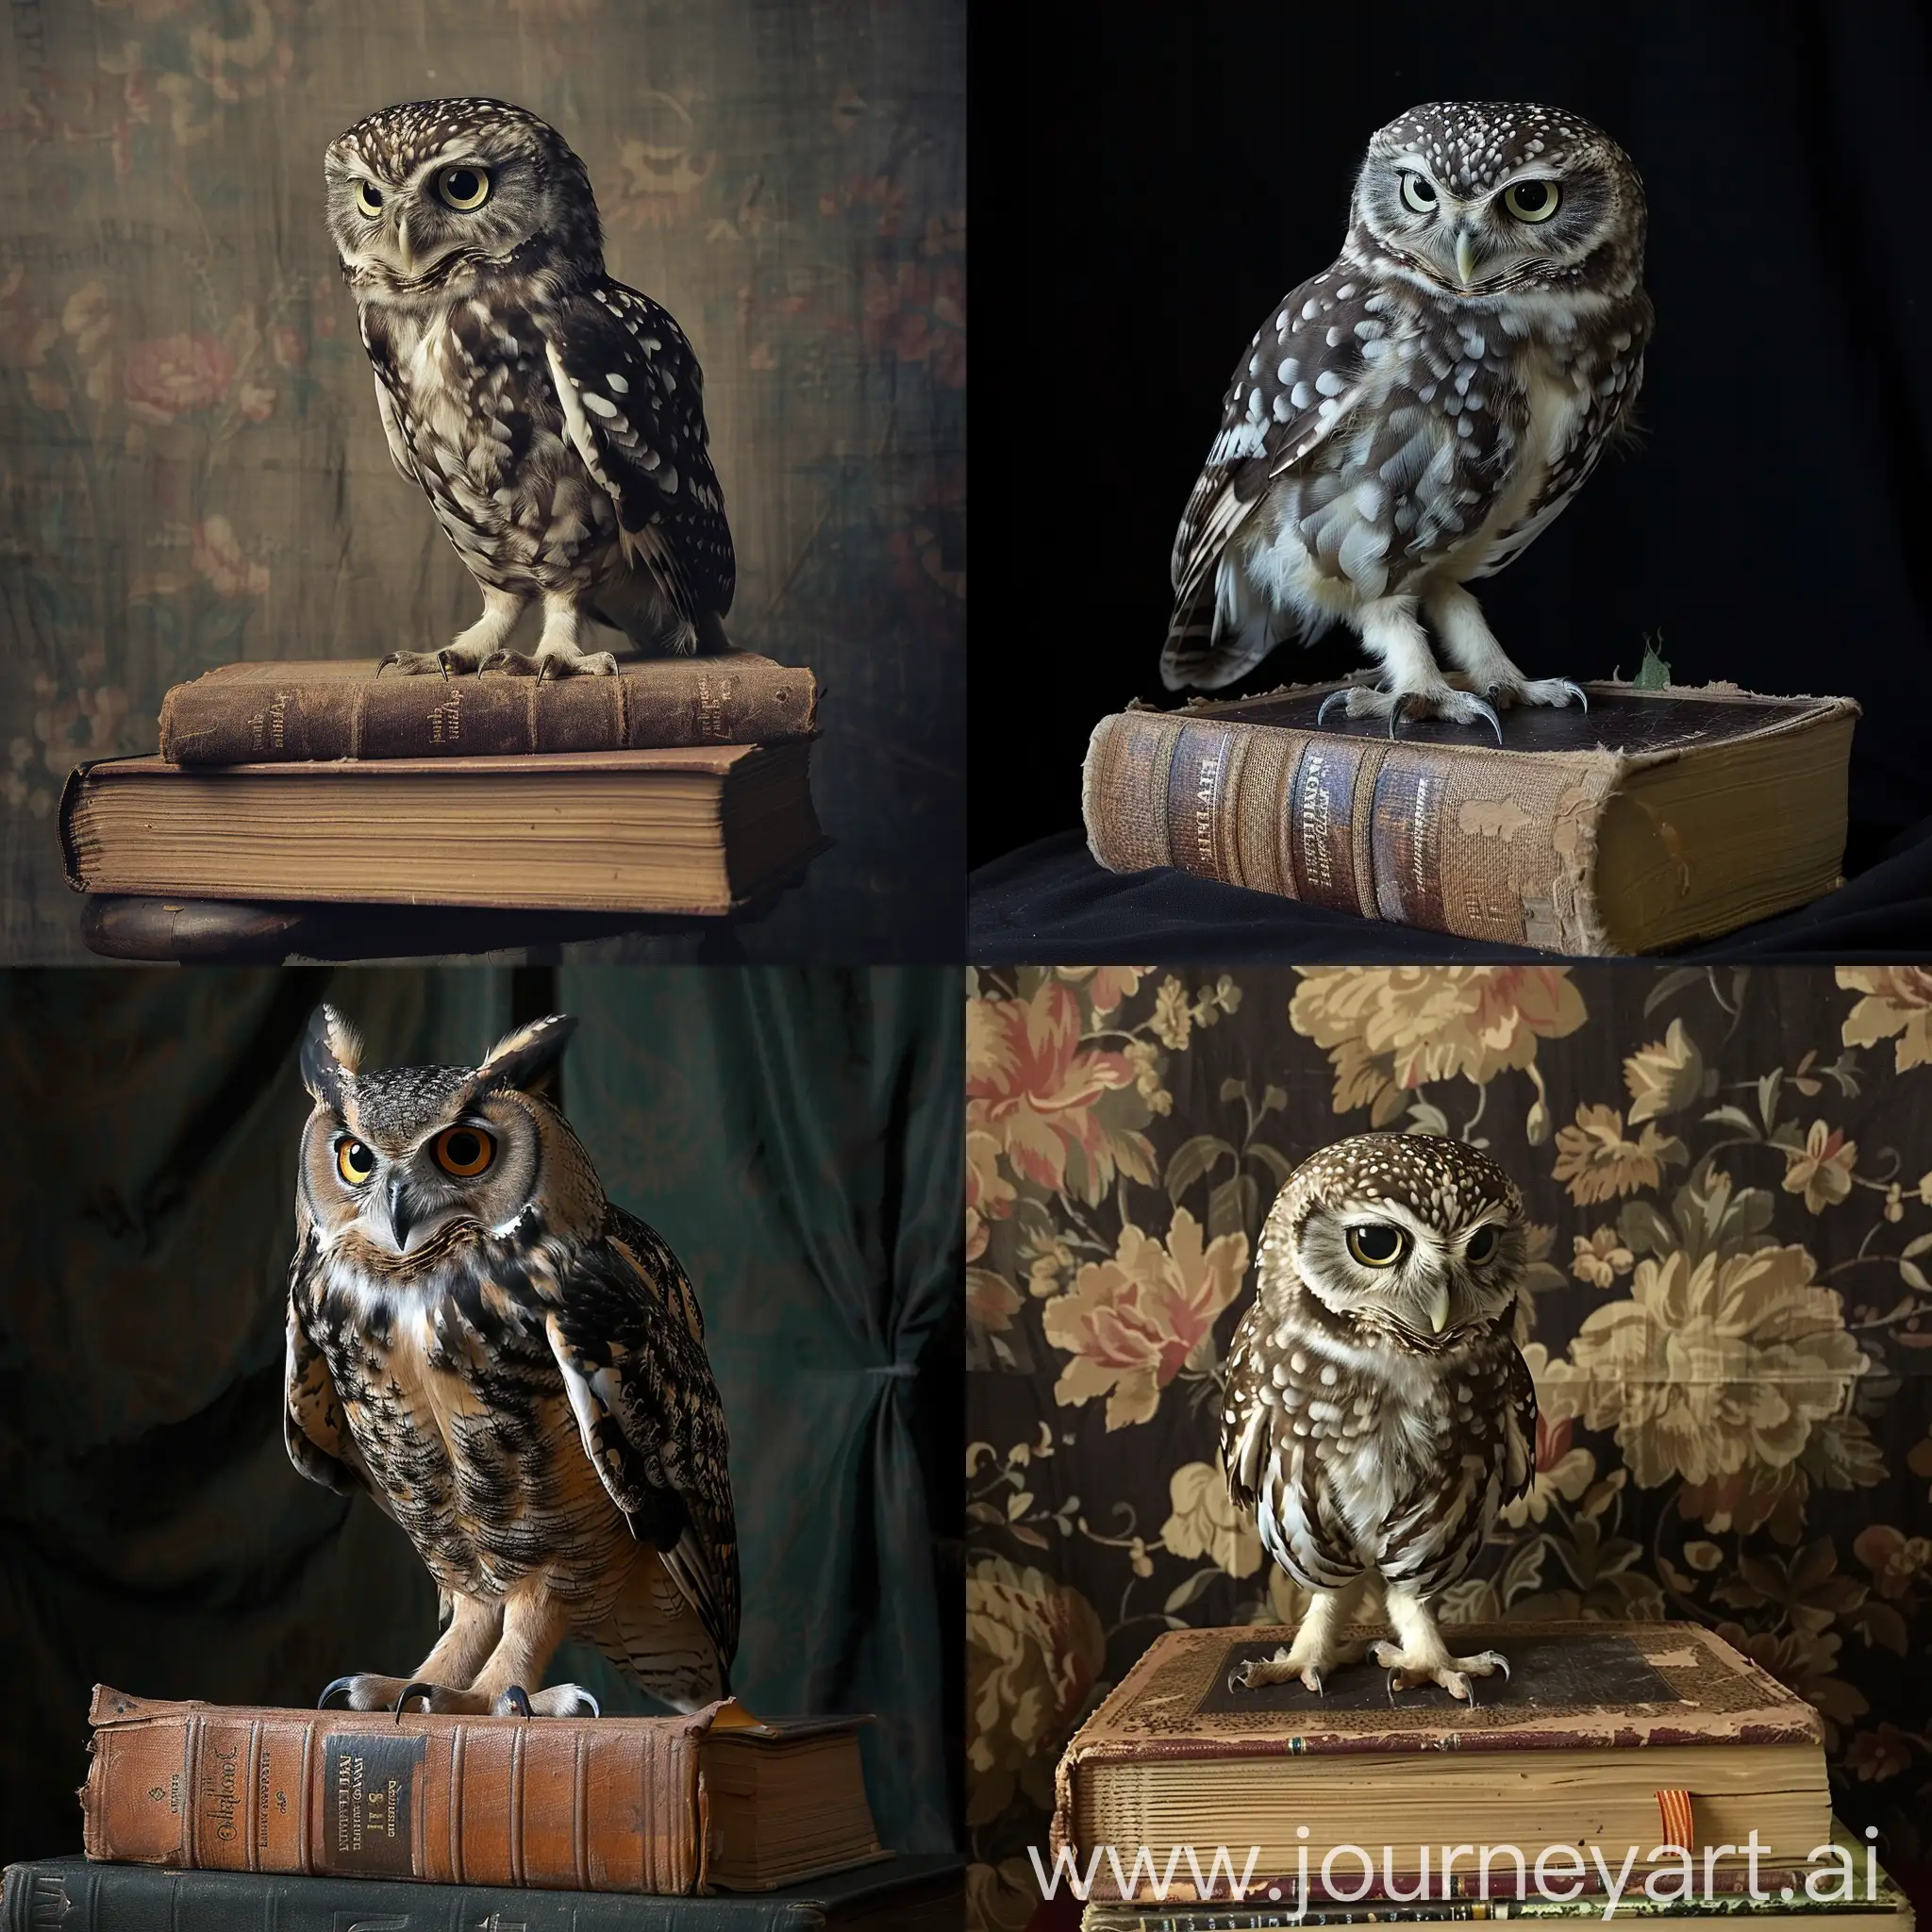 Wise-Owl-Perched-on-an-Open-Book